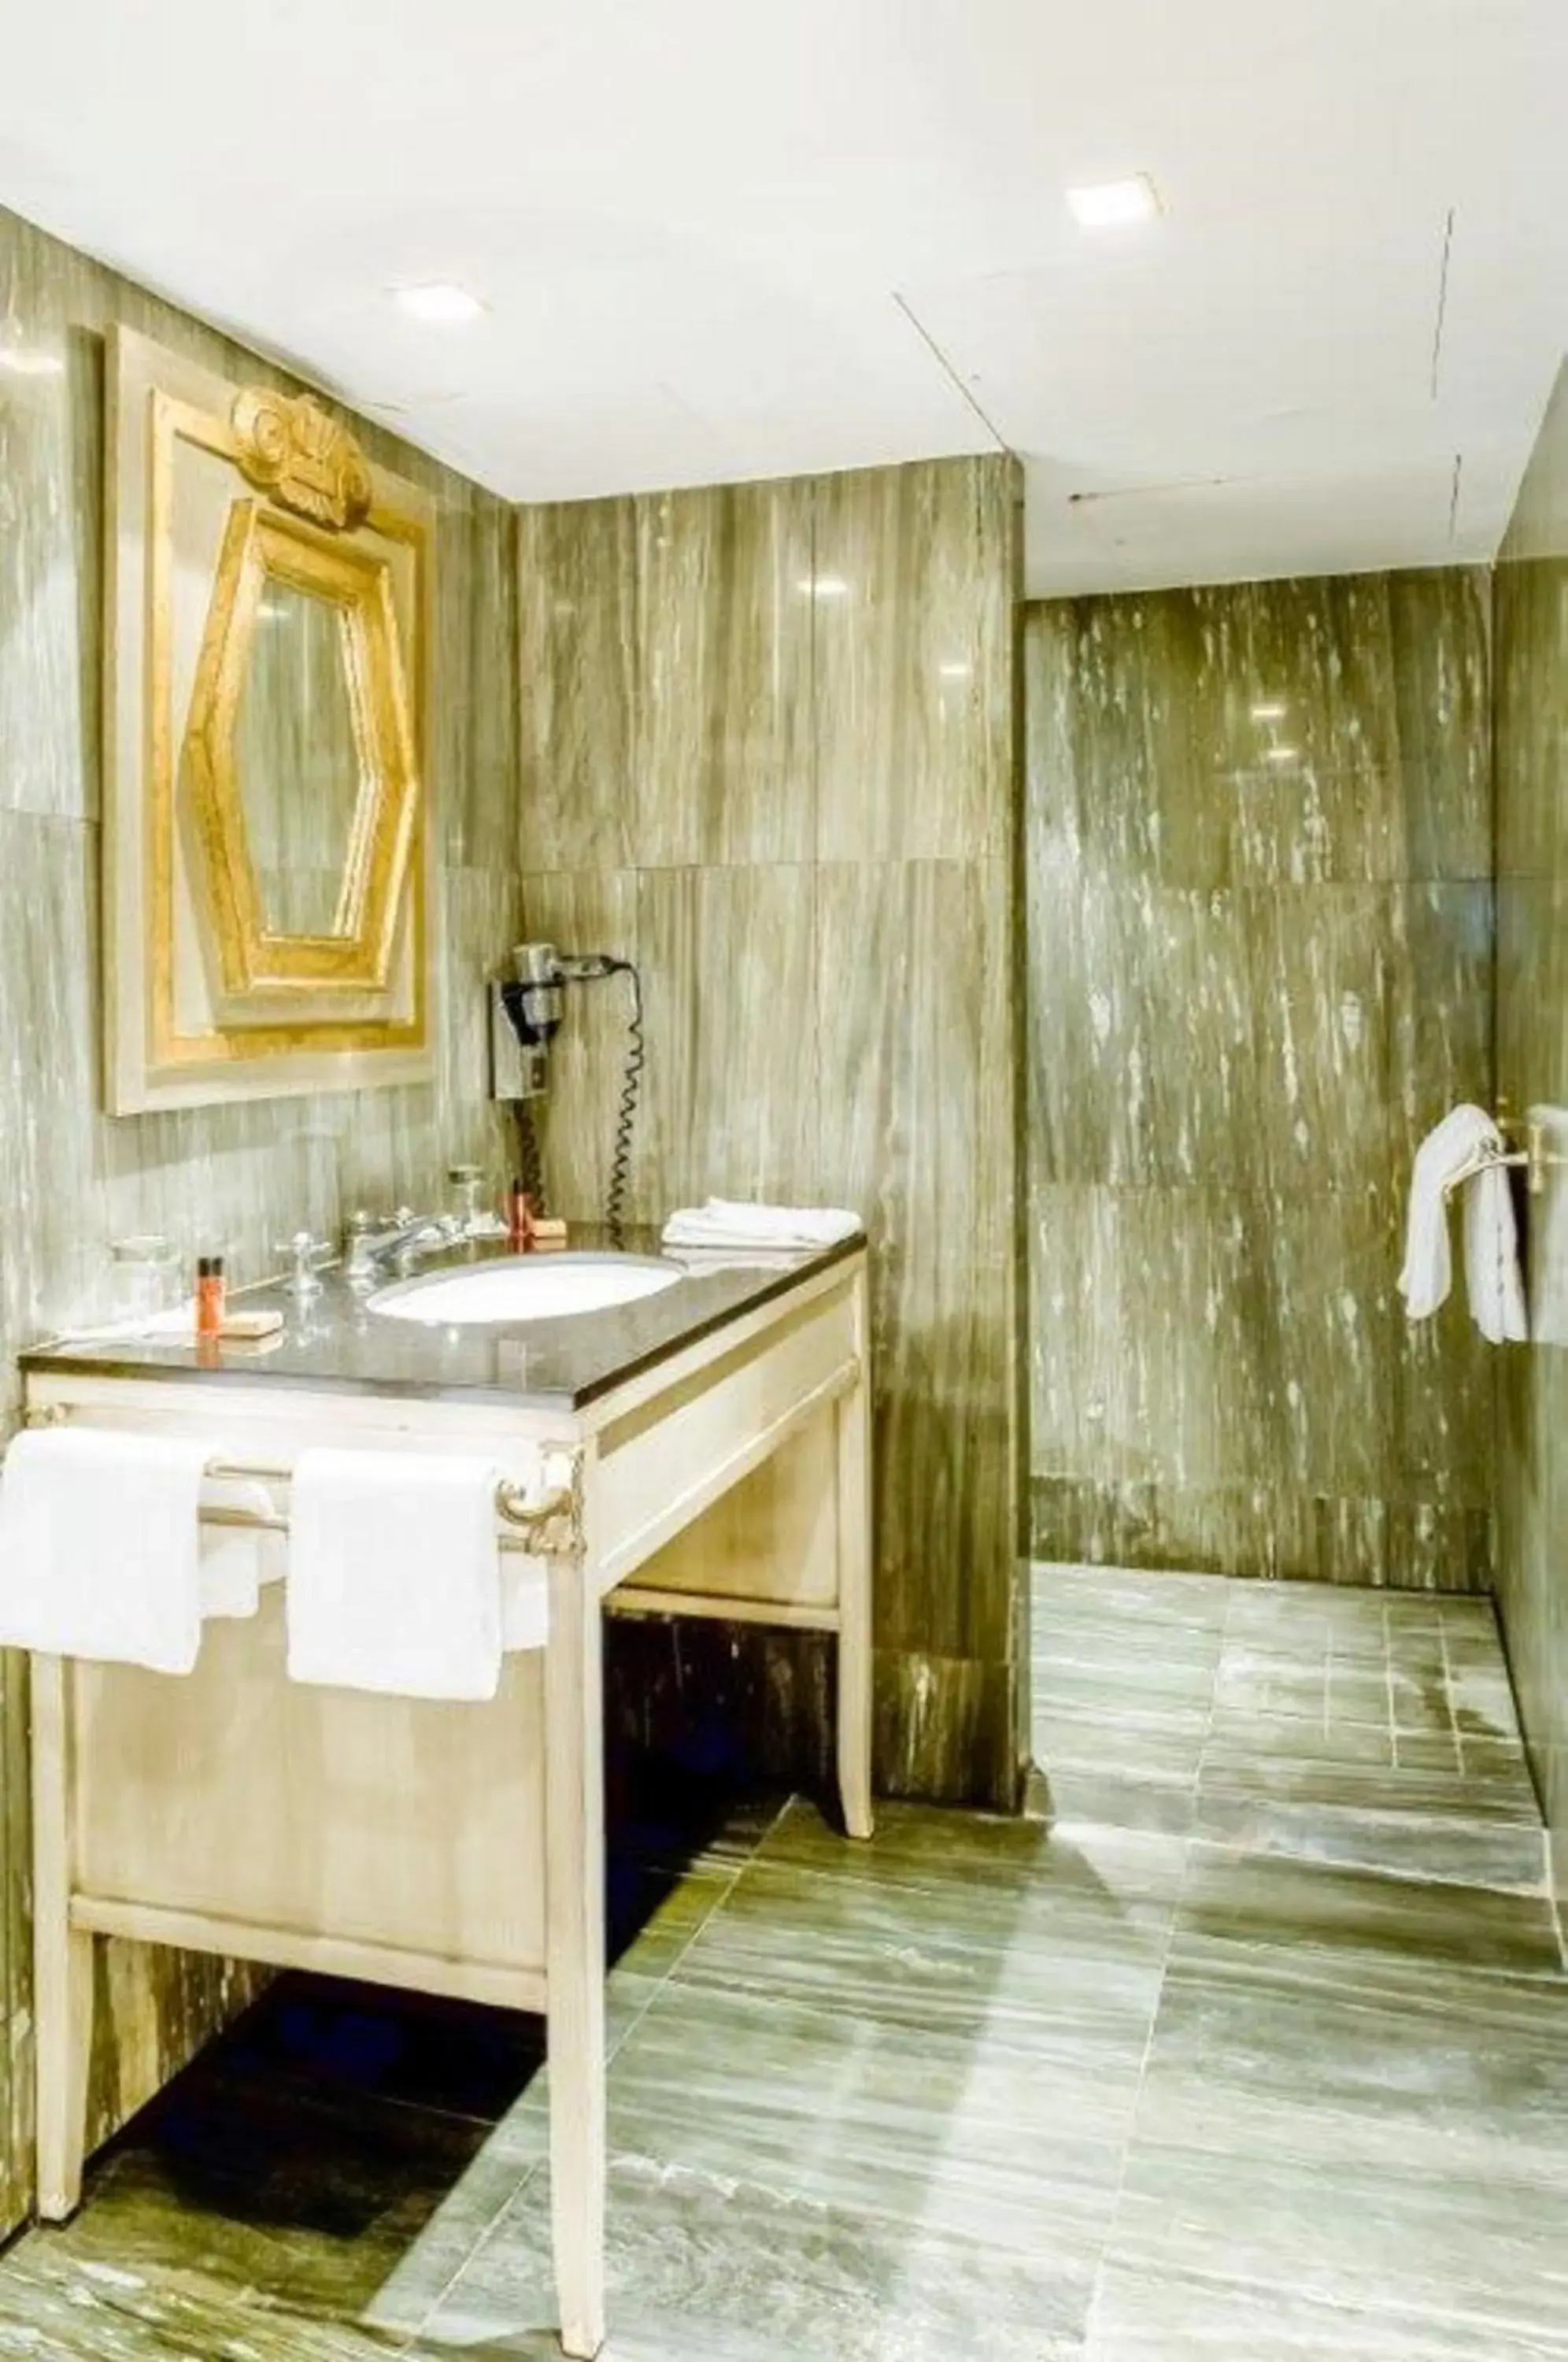 Bathroom in Chateaubriand Hotel